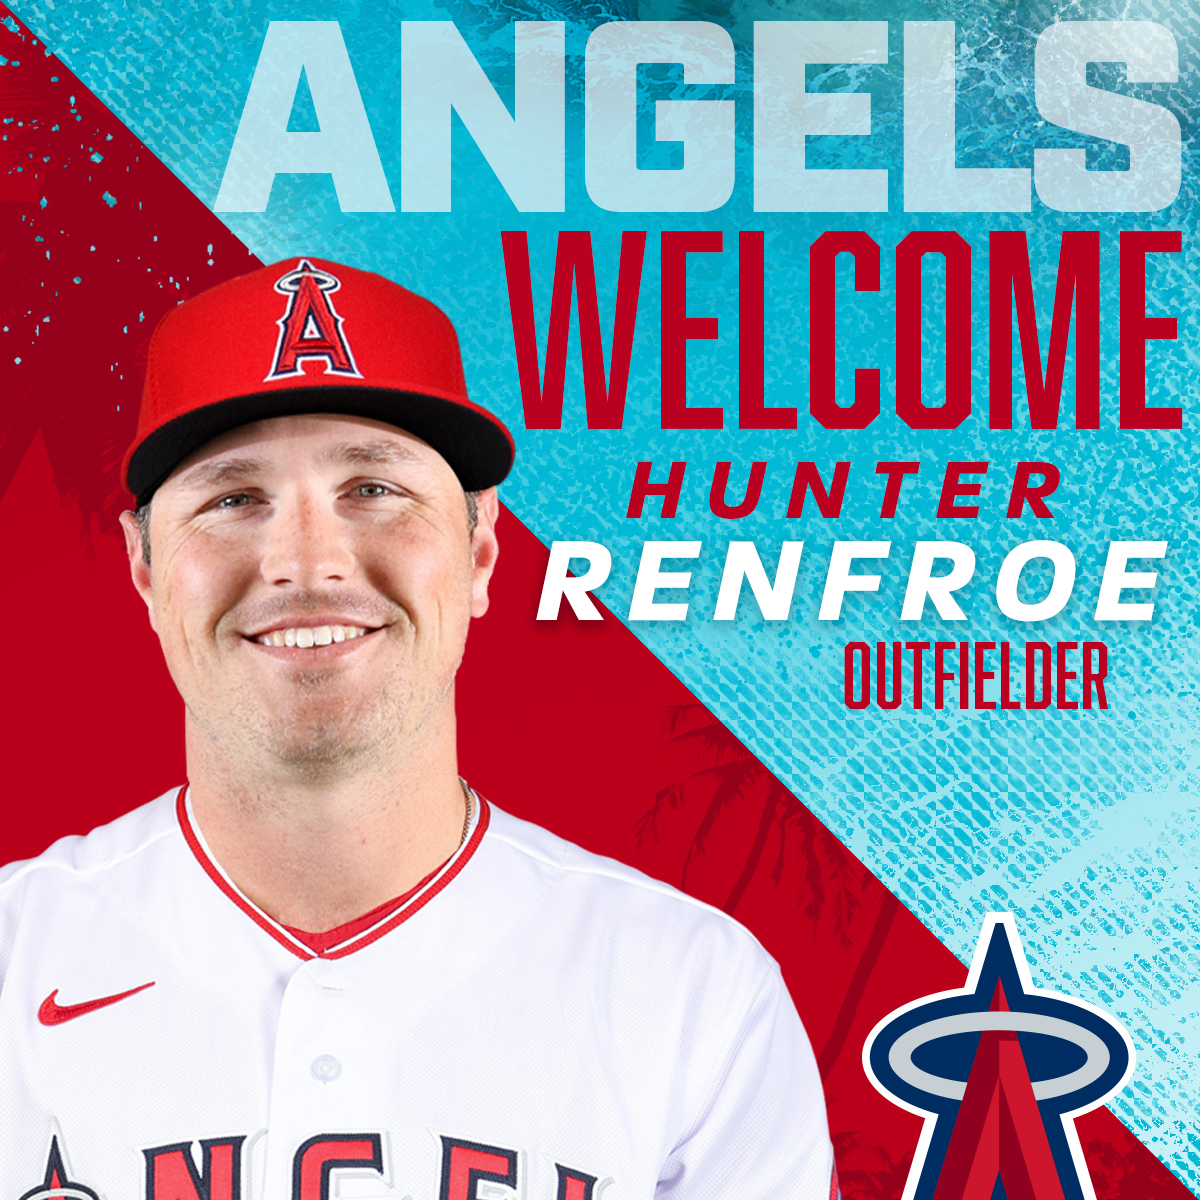 OFFICIAL: The Angels today acquired OF Hunter Renfroe from the Milwaukee Brewers in exchange for RHP Janson Junk, RHP Elvis Peguero and minor league LHP Adam Seminaris. https://t.co/YmVUc2TTS1